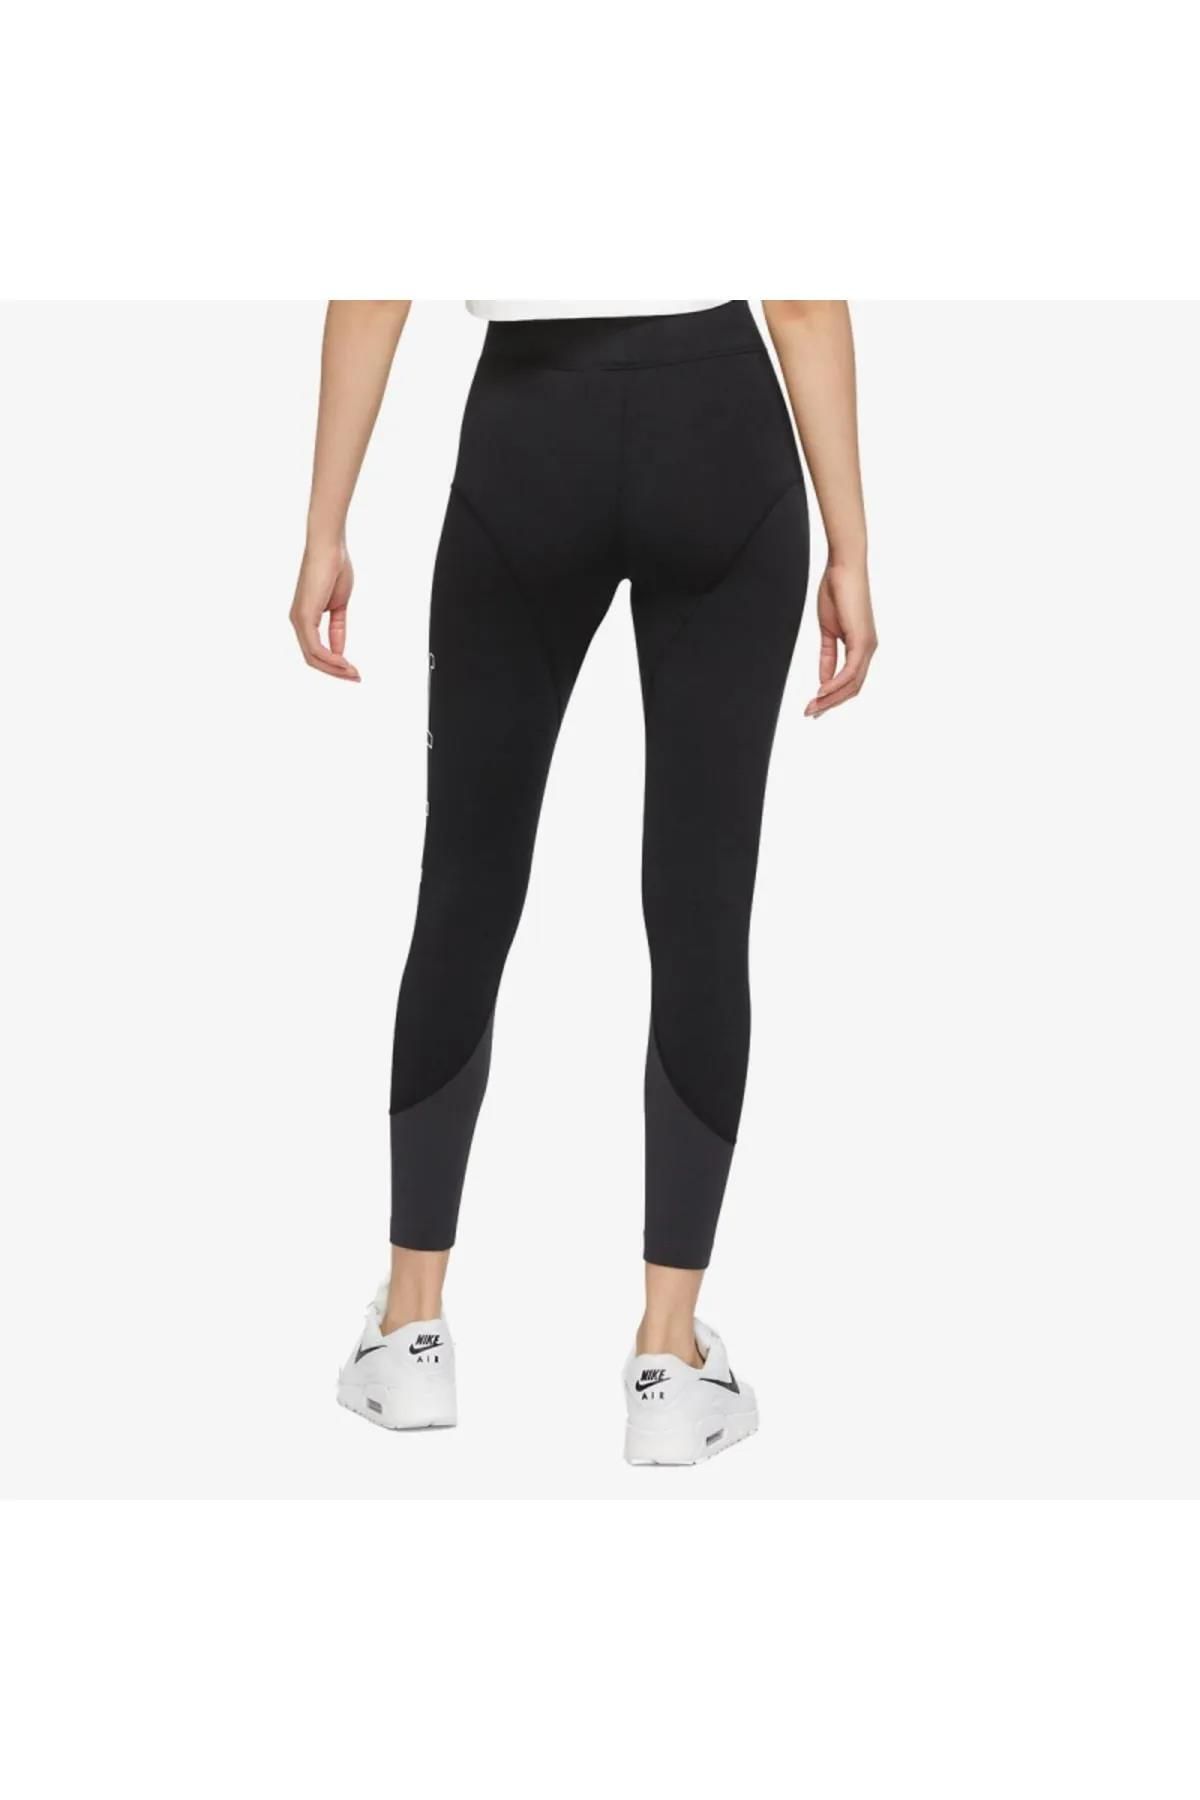 Nike Nsw Air Swosh High Waisted Black Women's Sports Tights Dr6159-010 -  Trendyol